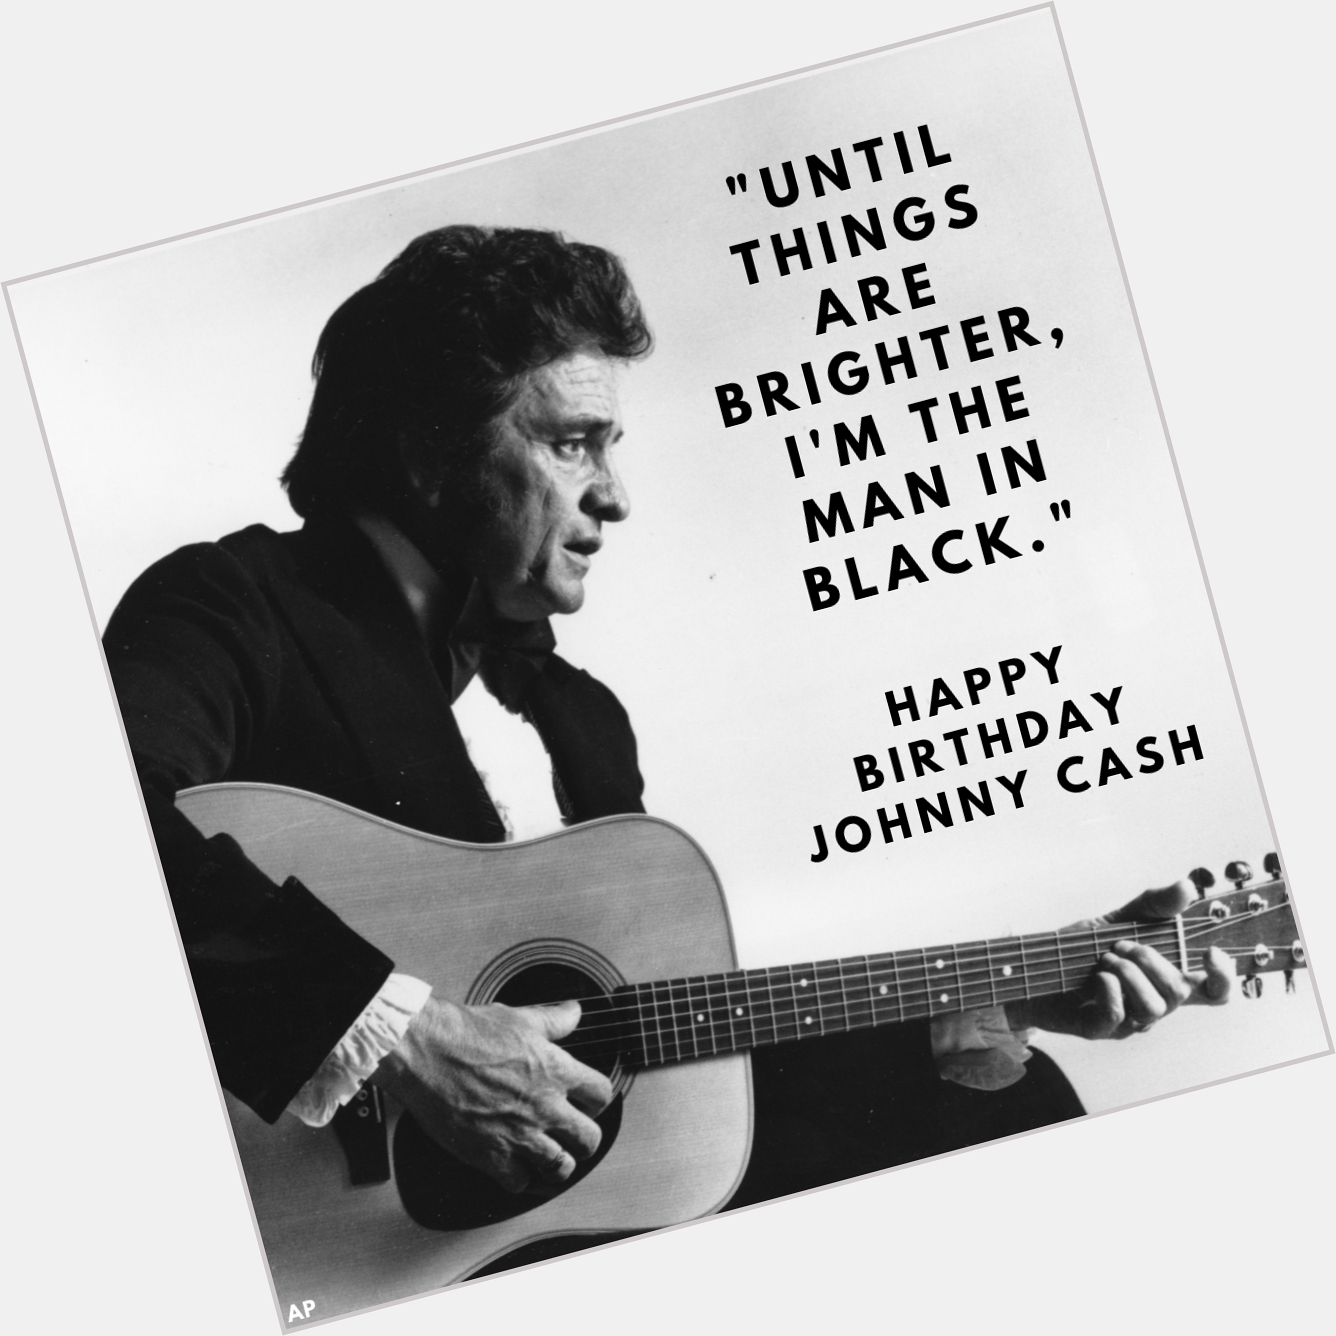 Happy Birthday! (1932-2003)
What is your favorite Johnny Cash song? Tell us in the comments. 